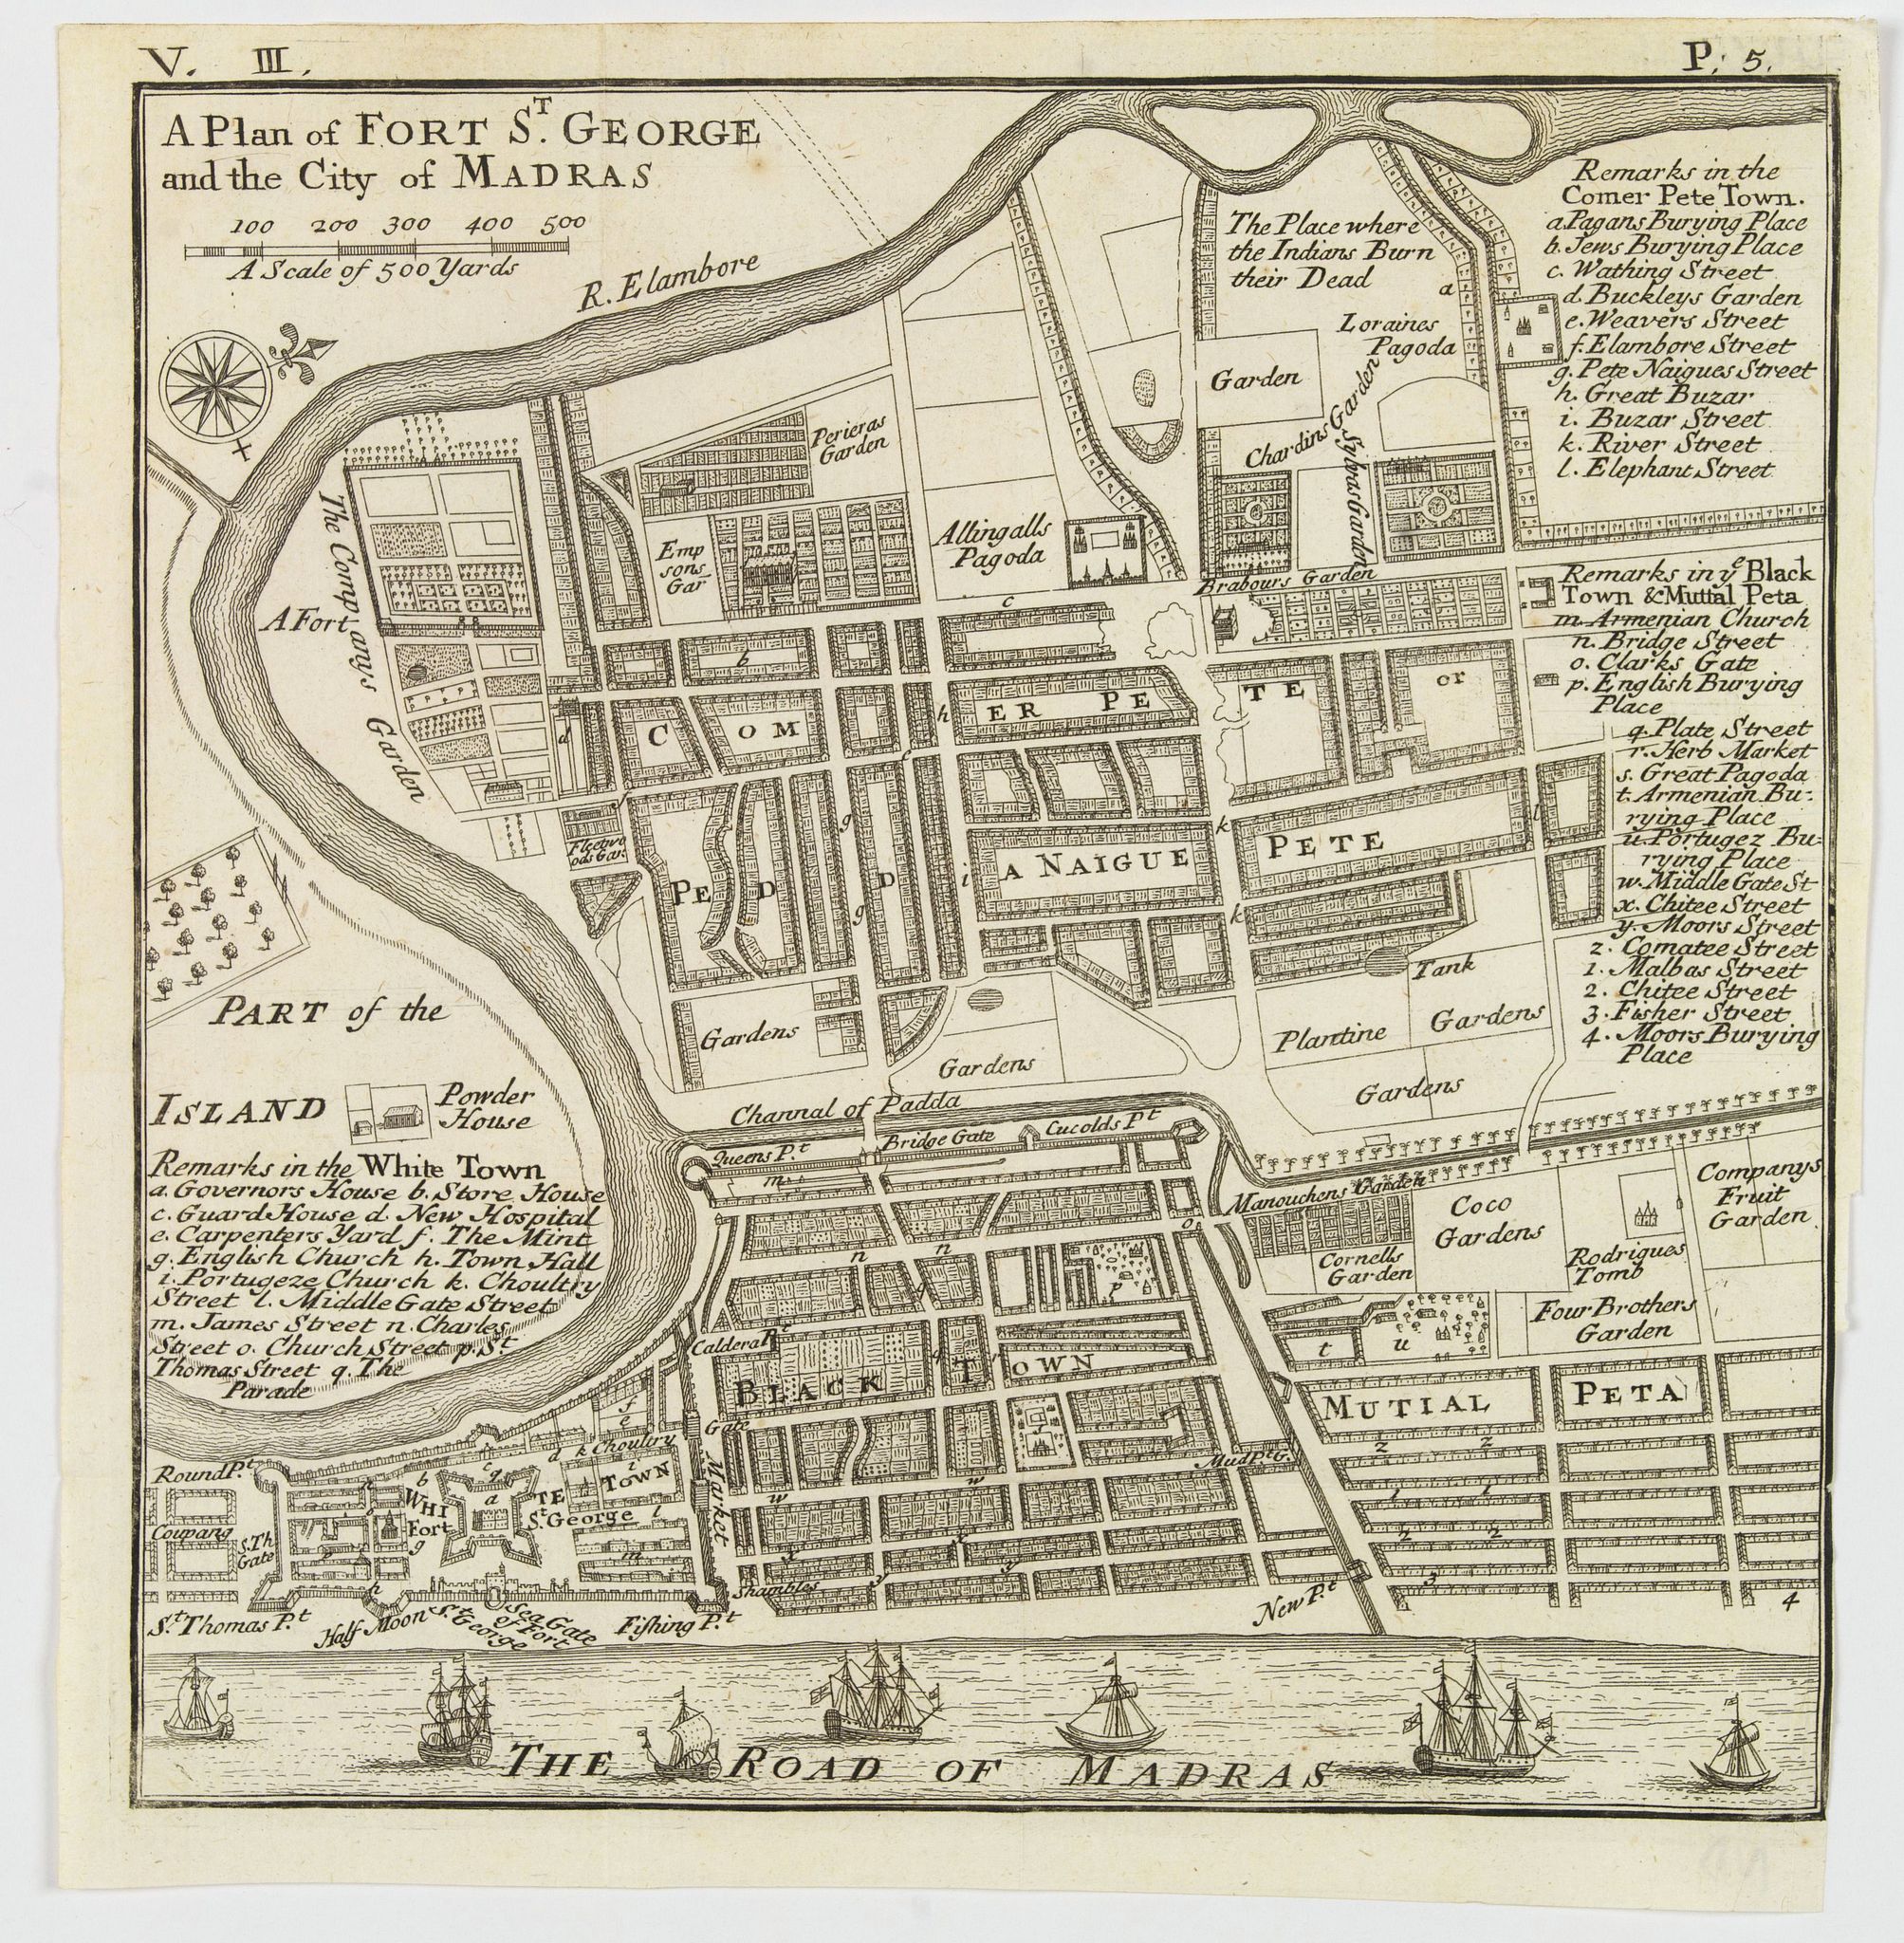 A Plan of Fort St. George and the City of Madras.